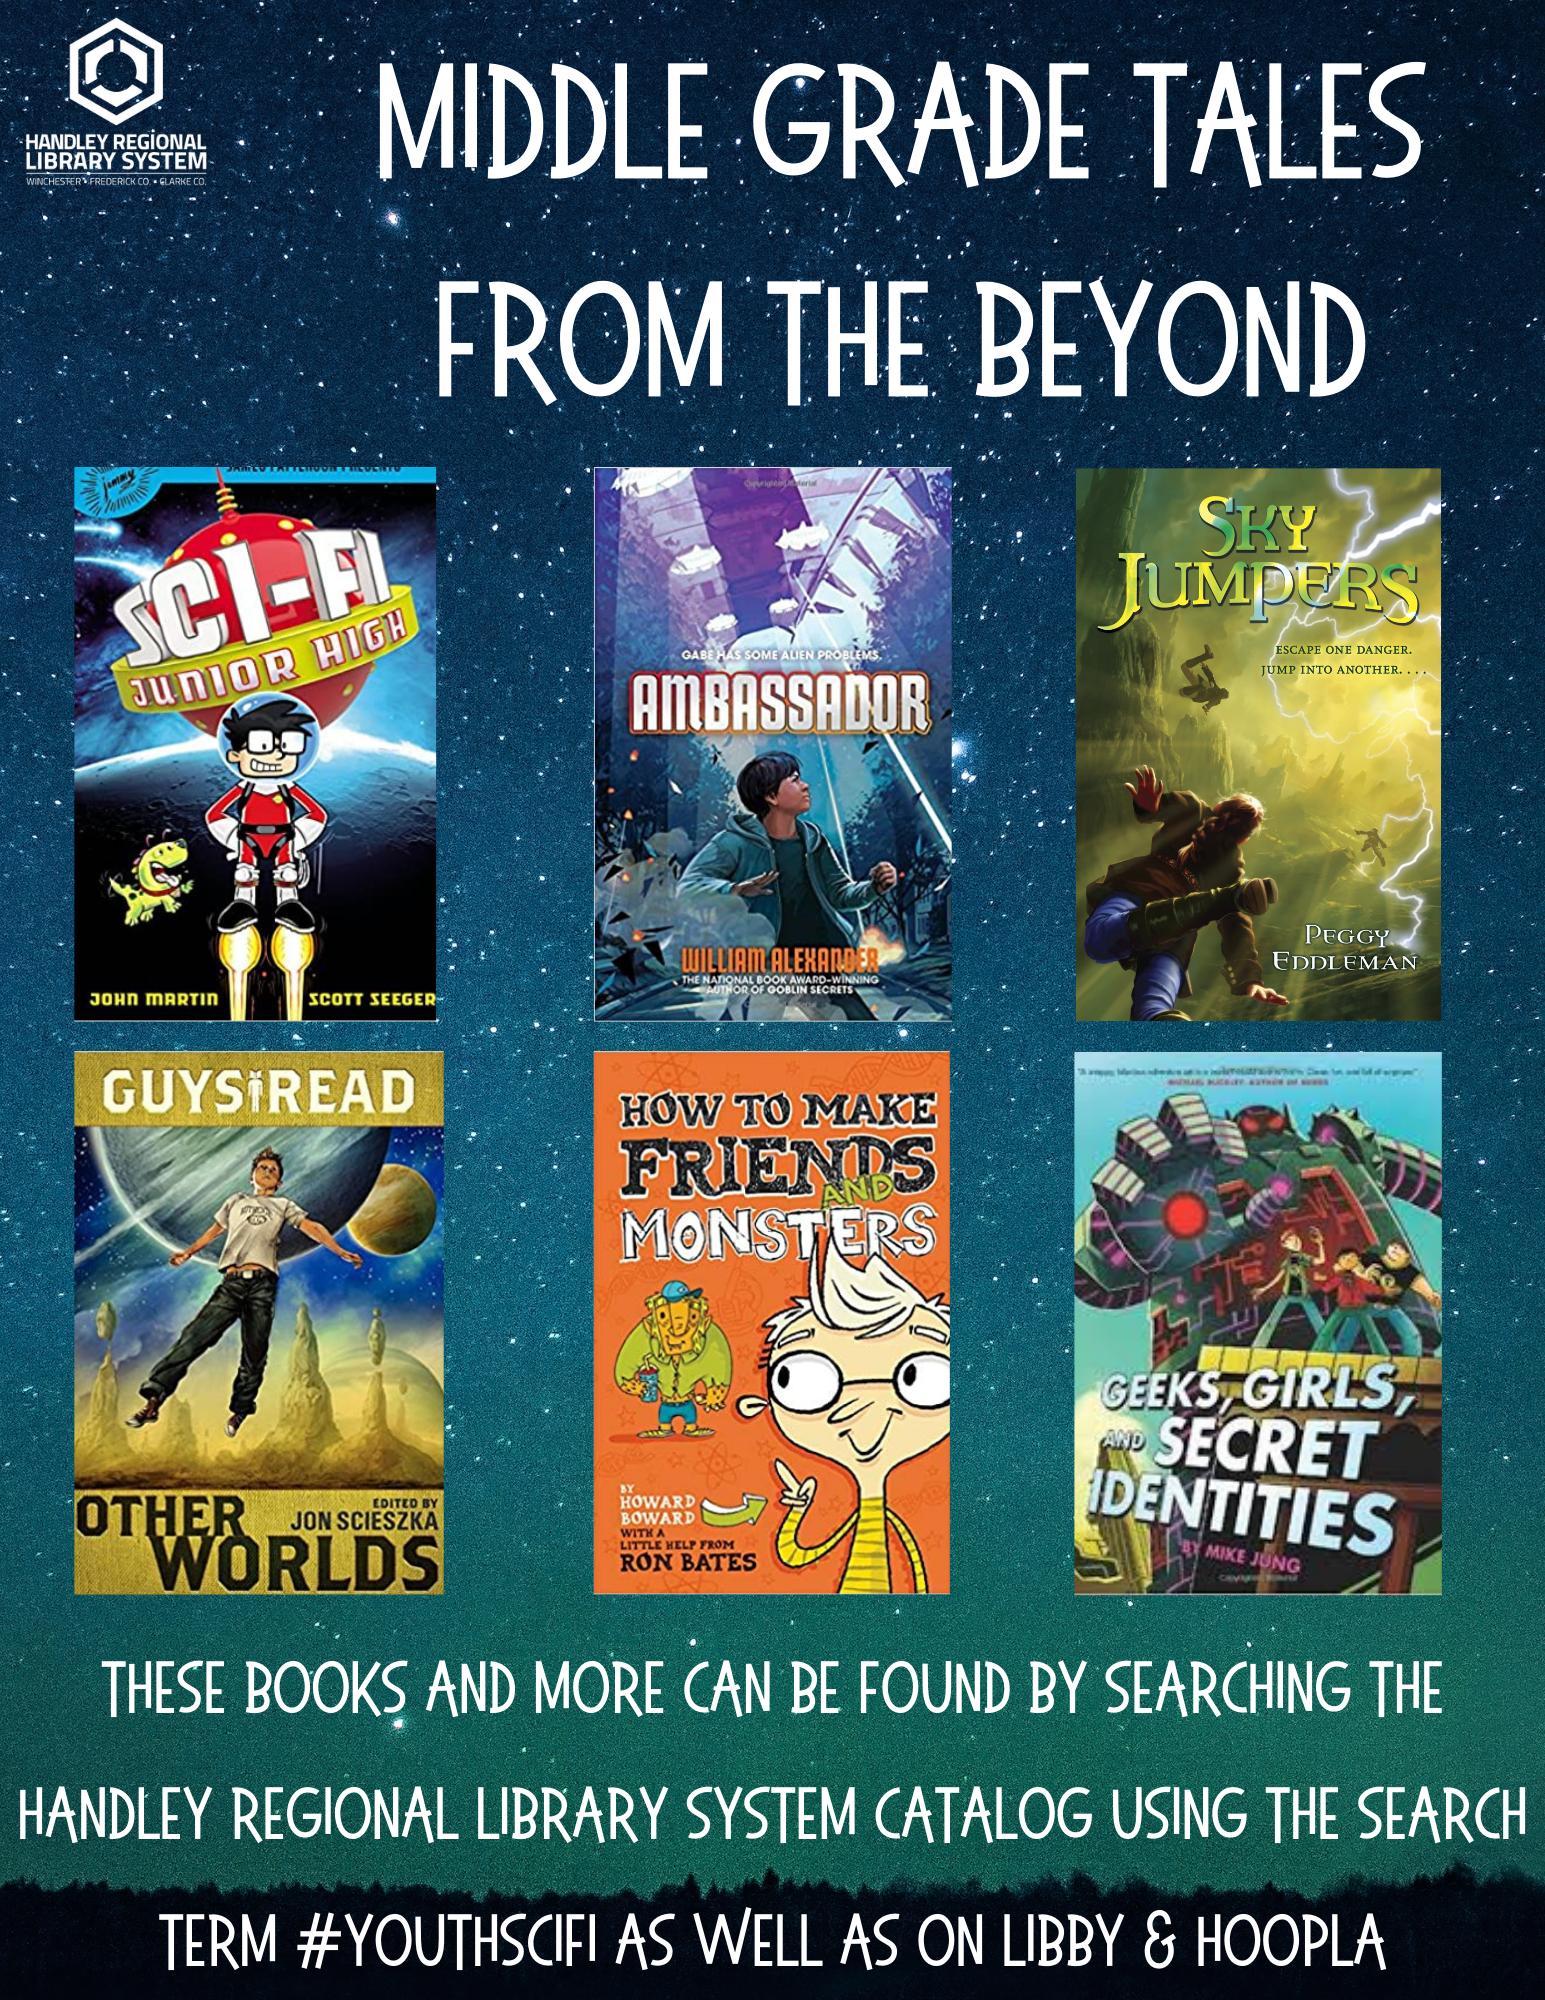 Middle Grade Tales From the Beyond Book Covers